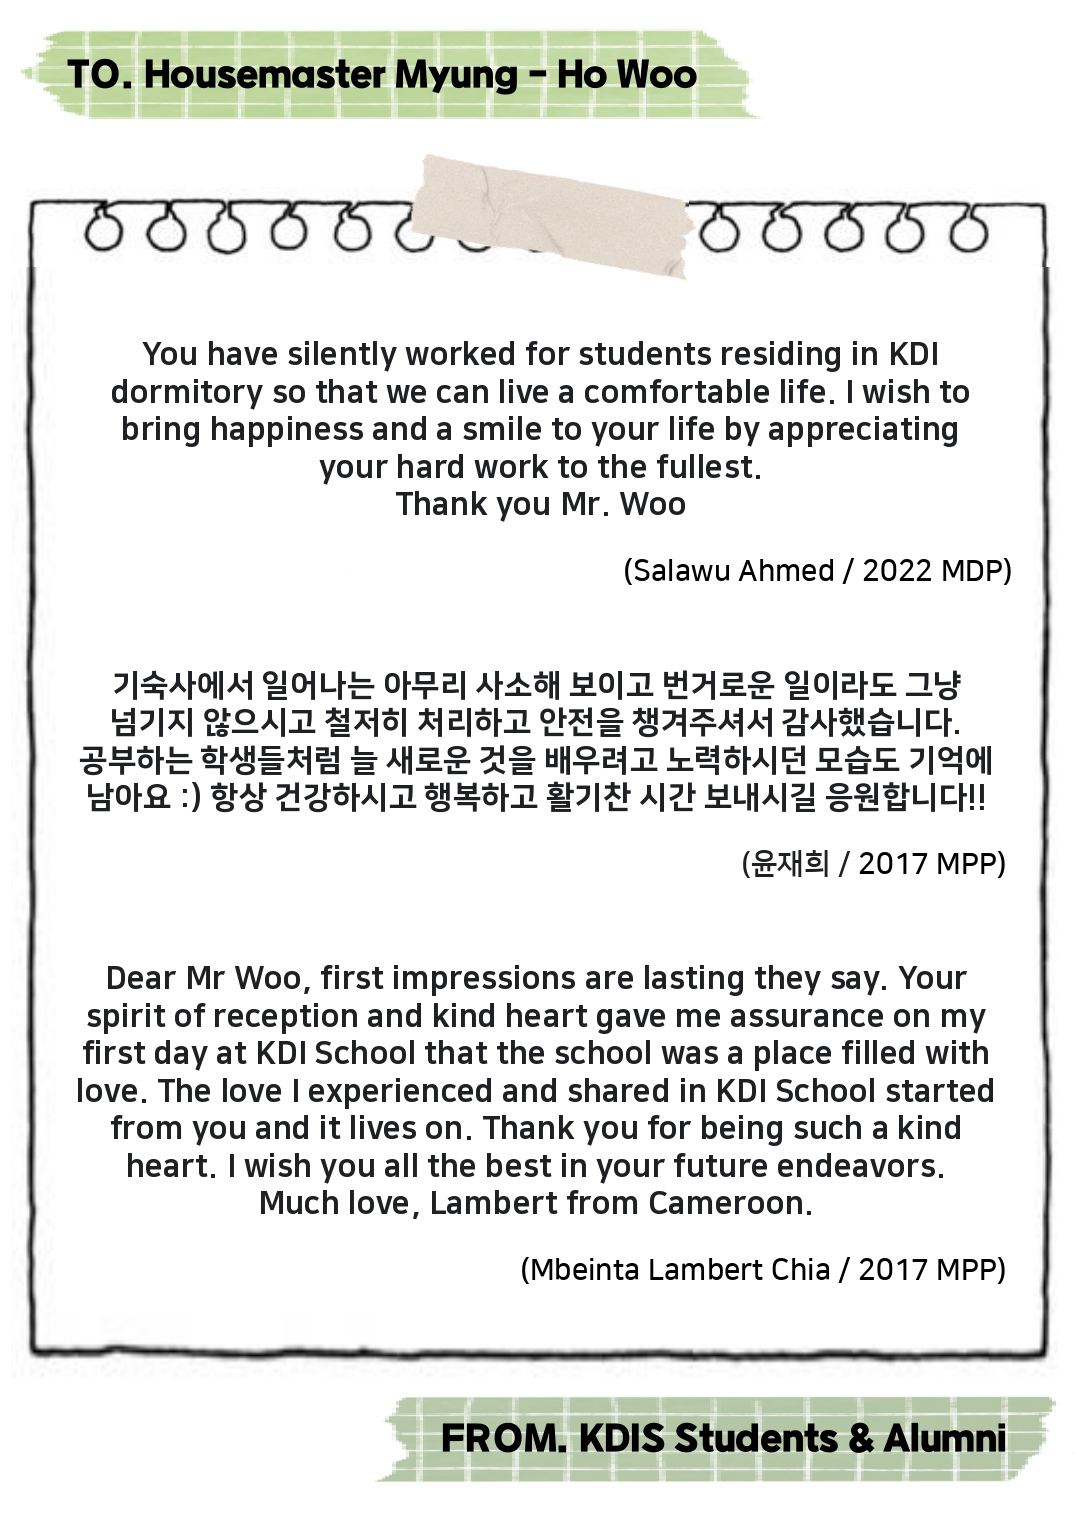 Thank you Housemaster Myung-ho Woo -Messages from KDIS Students and Alumni 사진10